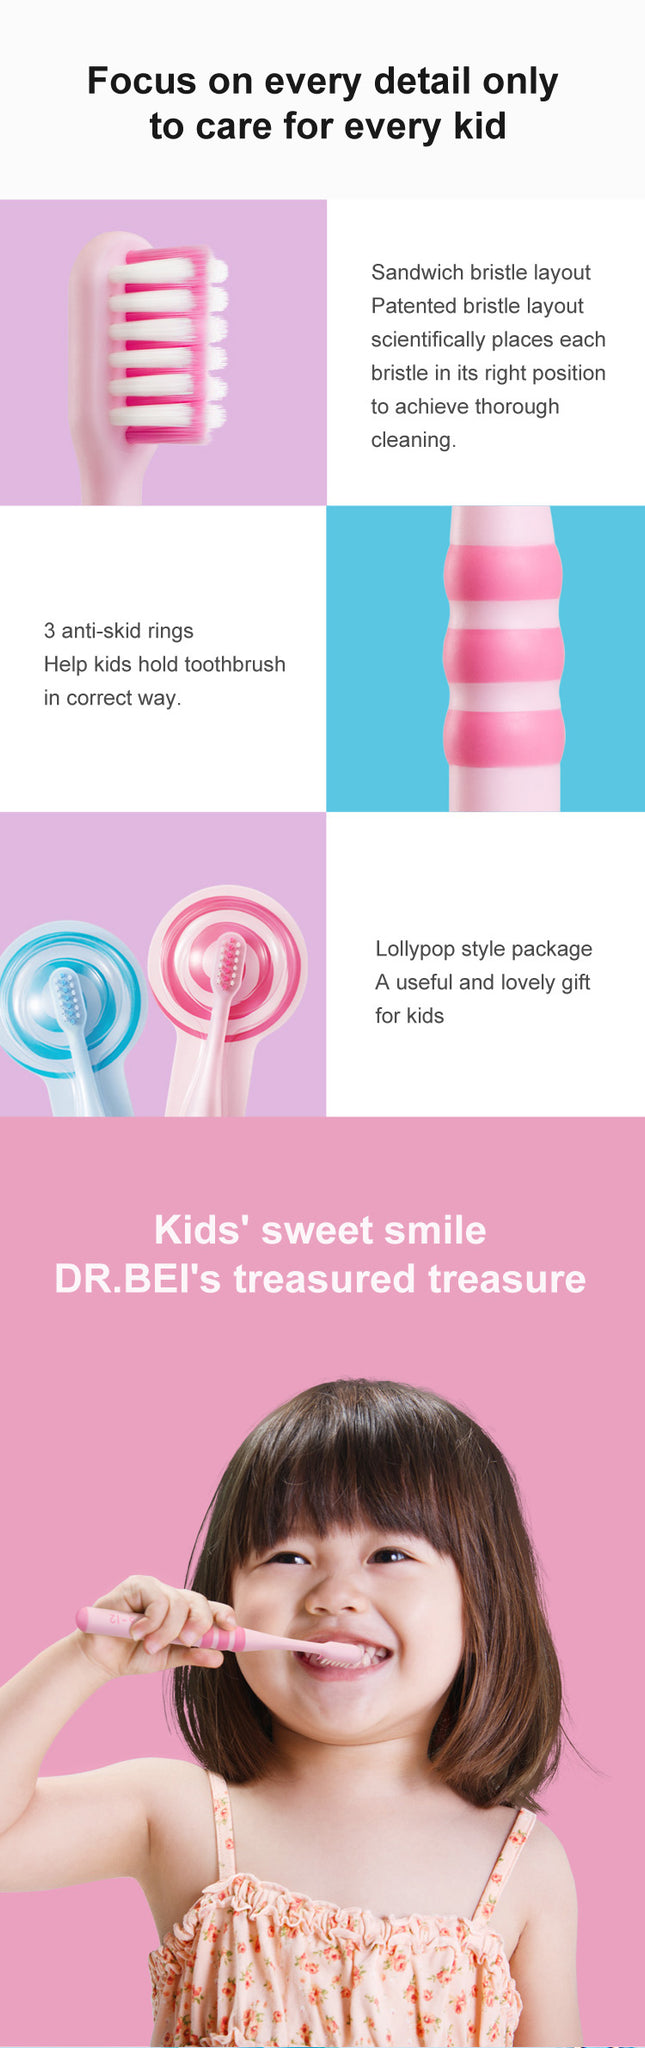 DR.BEI Children Toothbrush (6-12 Years old) Xiaomi Youpin DR·BEI Mini Kids Toothbrush Deep Clean Soft Sandwish-bedded Texture Dental Oral Care Health for Children Teeth Brush Cleaning